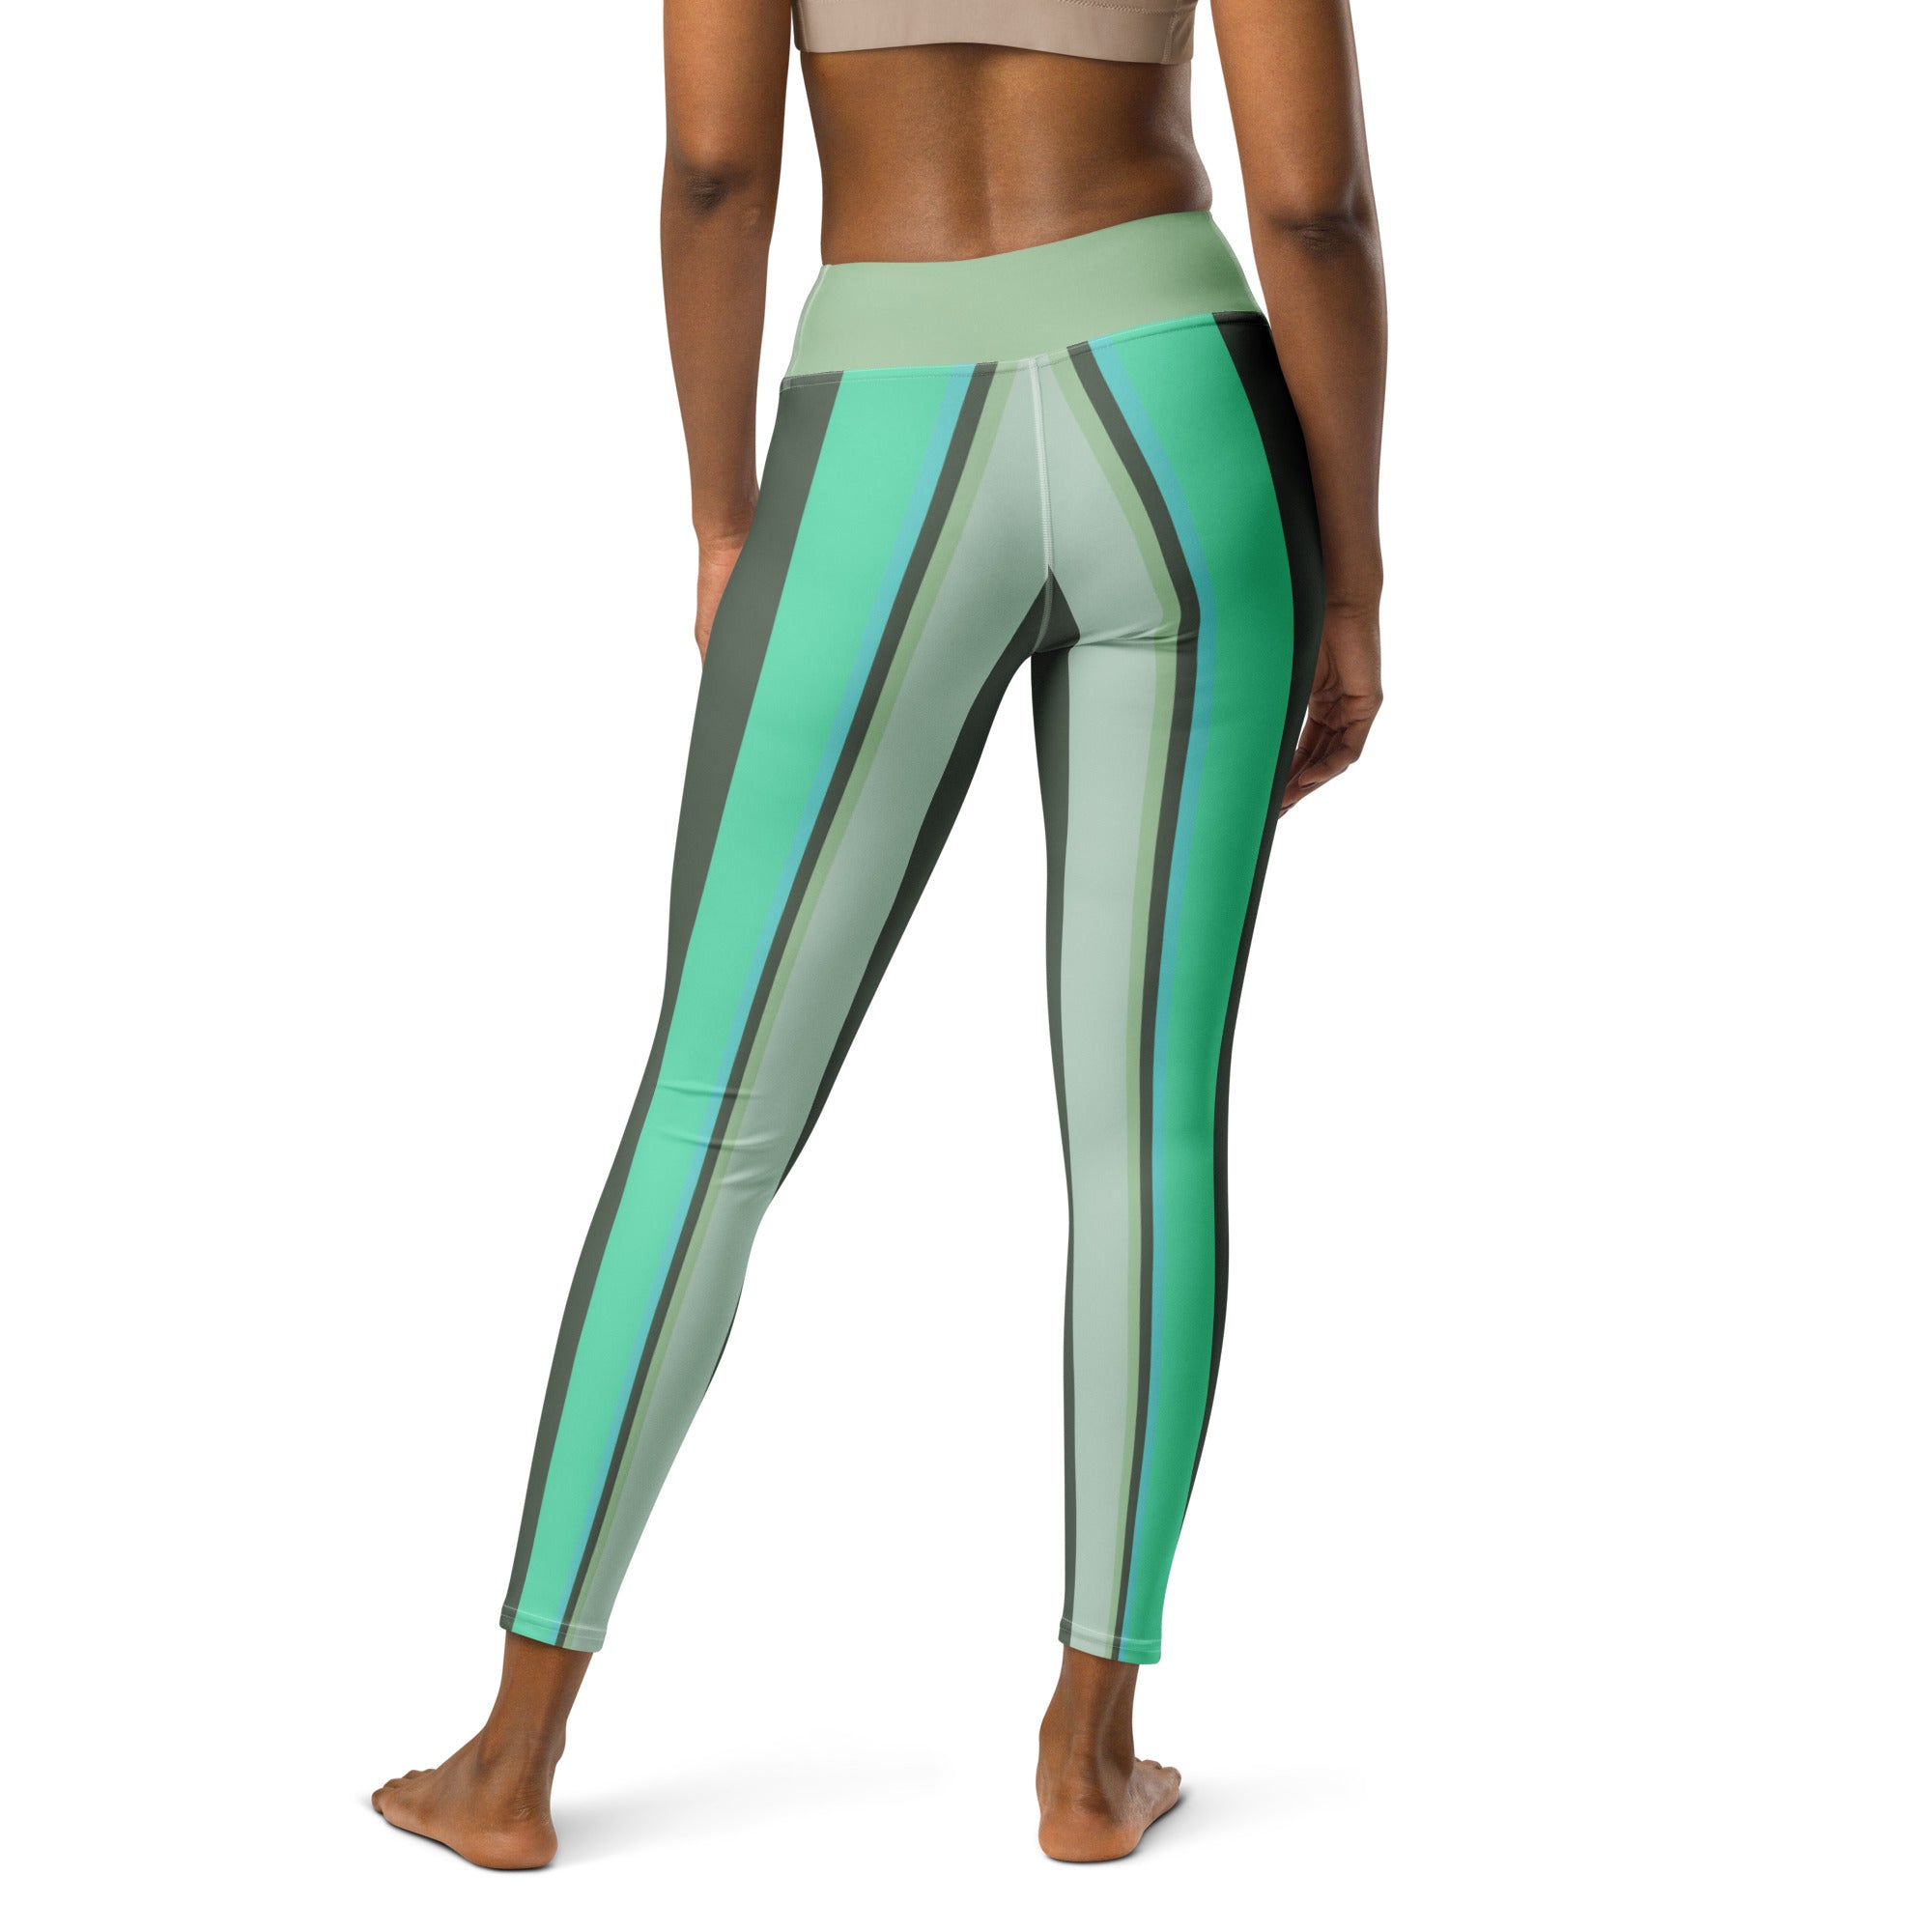 Elegant striped yoga leggings inspired by celestial patterns, offering both beauty and flexibility.